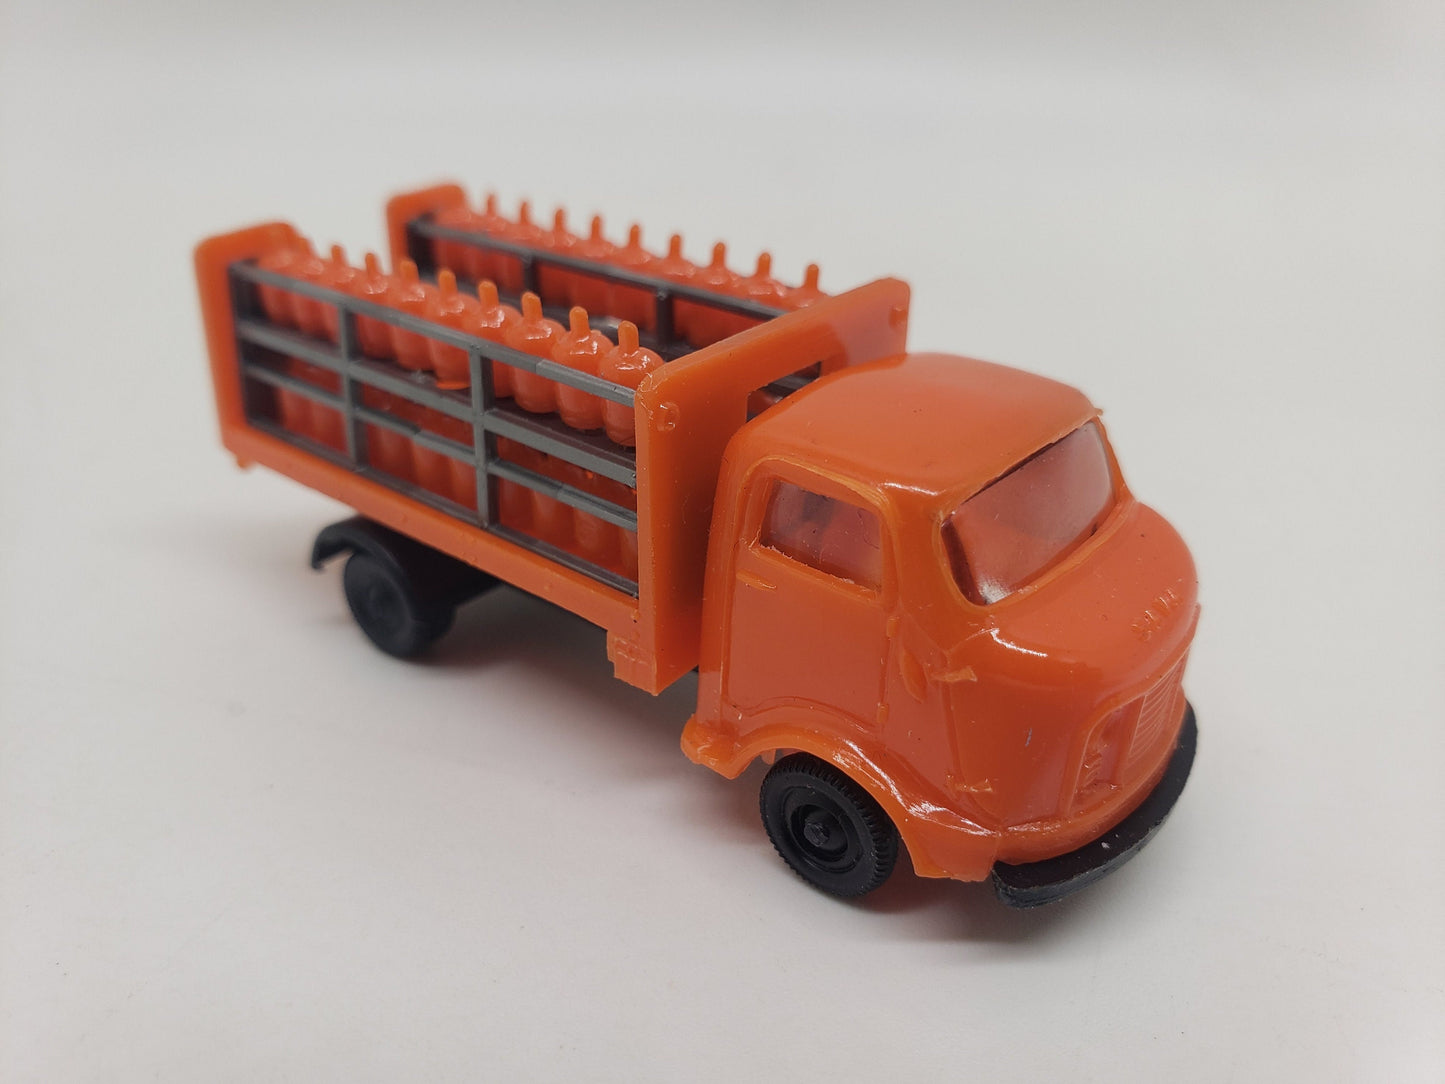 EKO Sava Container Truck Orange Collectable HO Scale Model Miniature Toy Car Perfect Birthday Gift